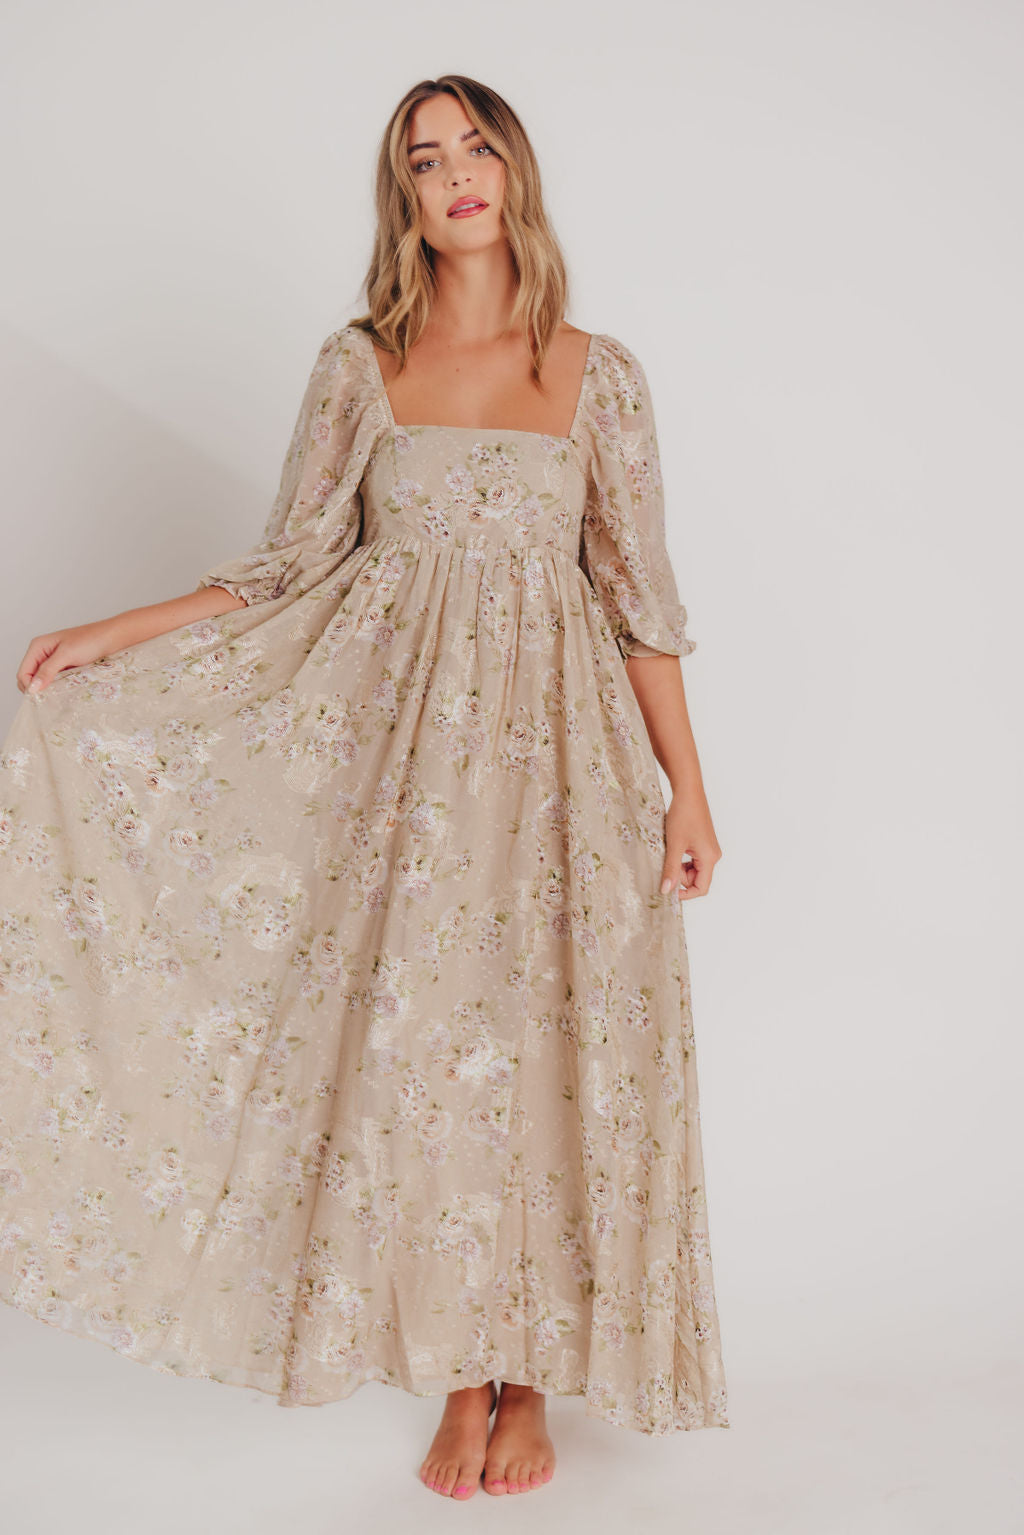 Mona Maxi Dress in Beige/Brown Floral - Bump Friendly - Inclusive Sizing (S-2X) *LOW QUANTITIES